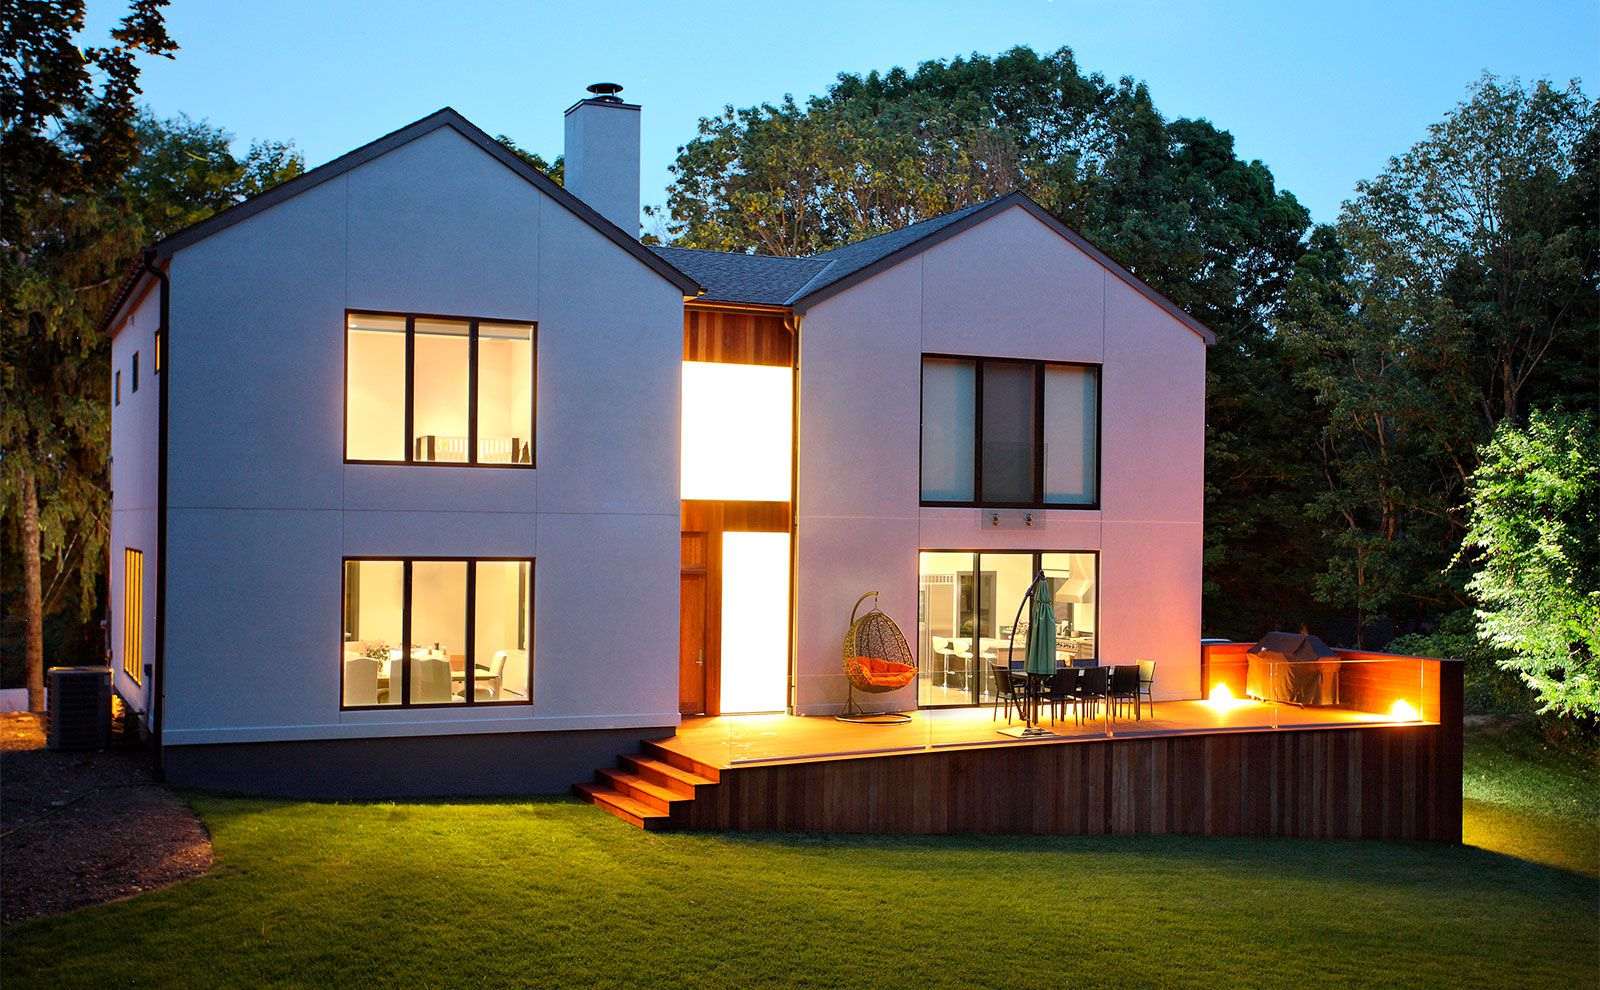 An image of a modern house at dusk, with interior lights on and exterior deck lighting.